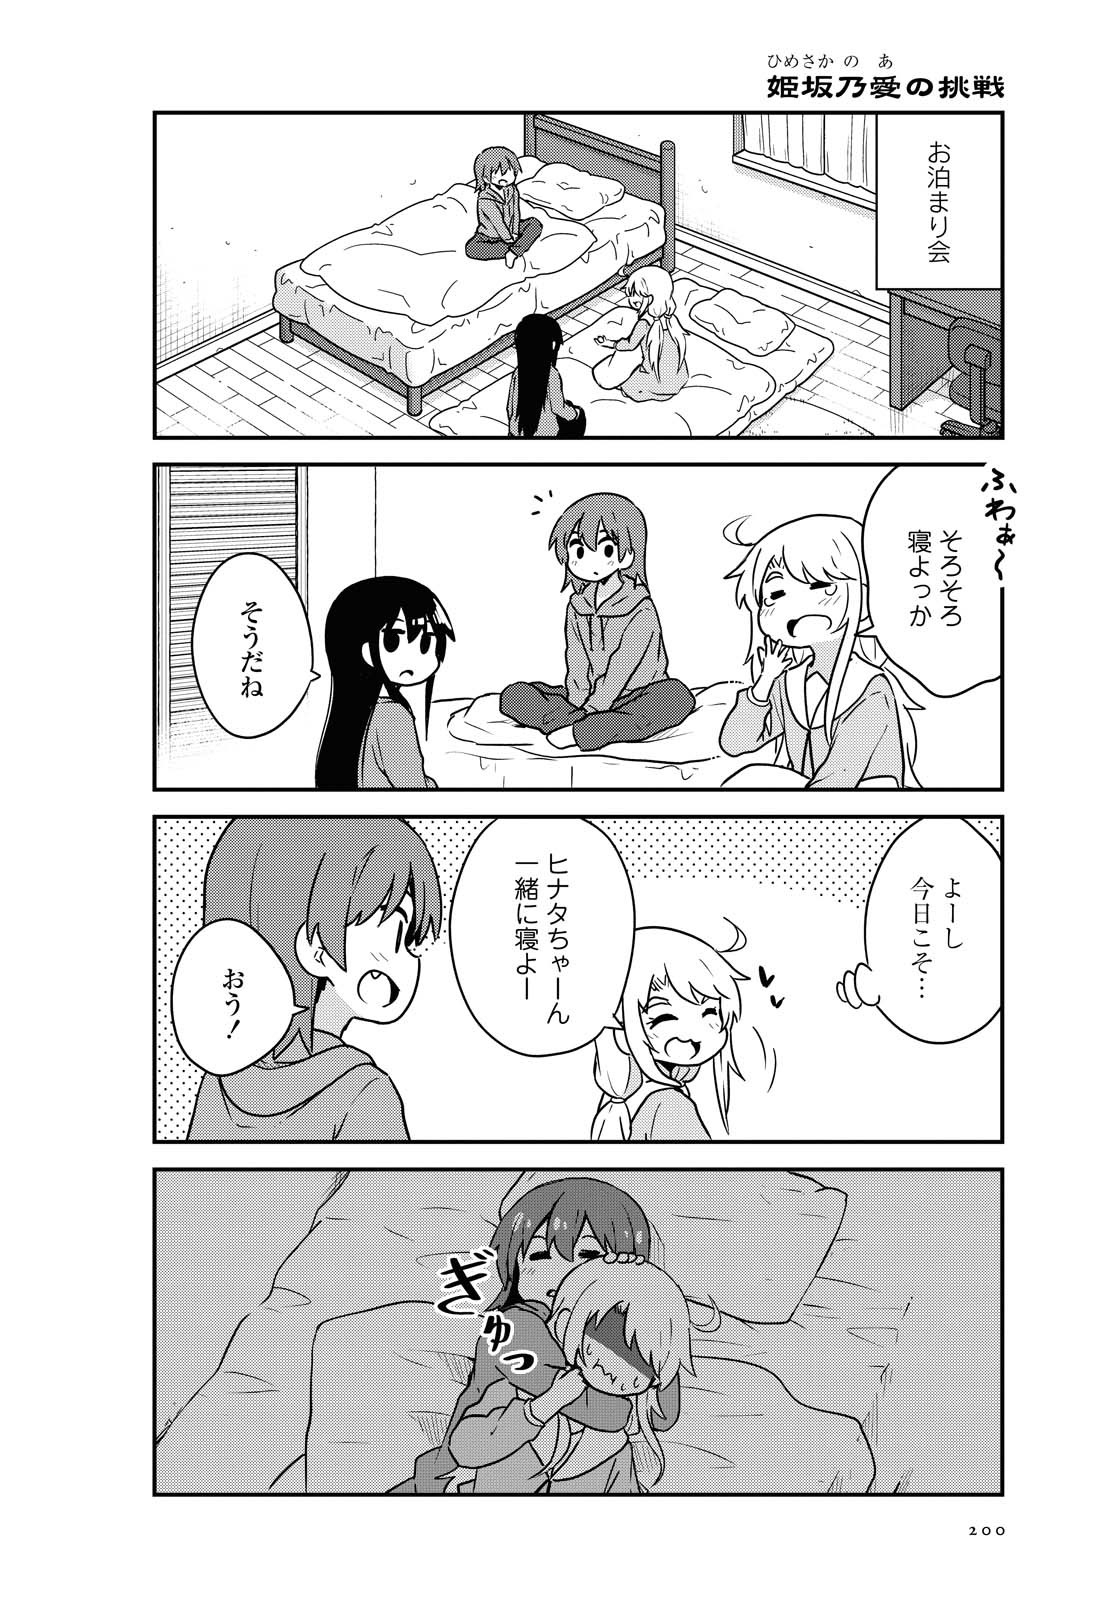 Wataten! An Angel Flew Down to Me 私に天使が舞い降りた！ 第66話 - Page 2